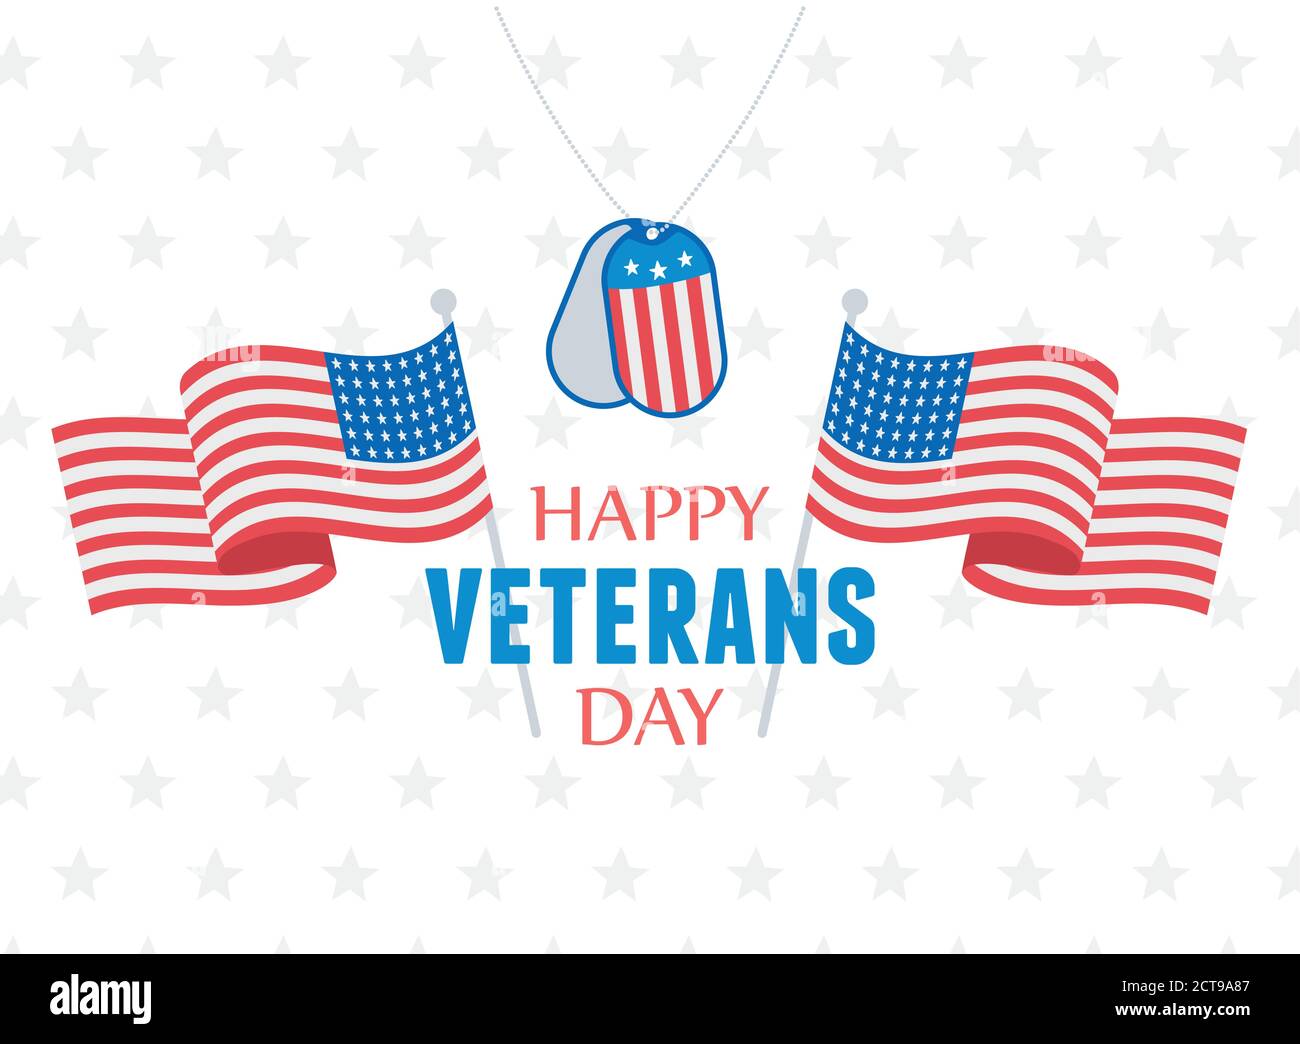 happy veterans day, US military armed forces soldier flags and medal stars background vector illustration Stock Vector